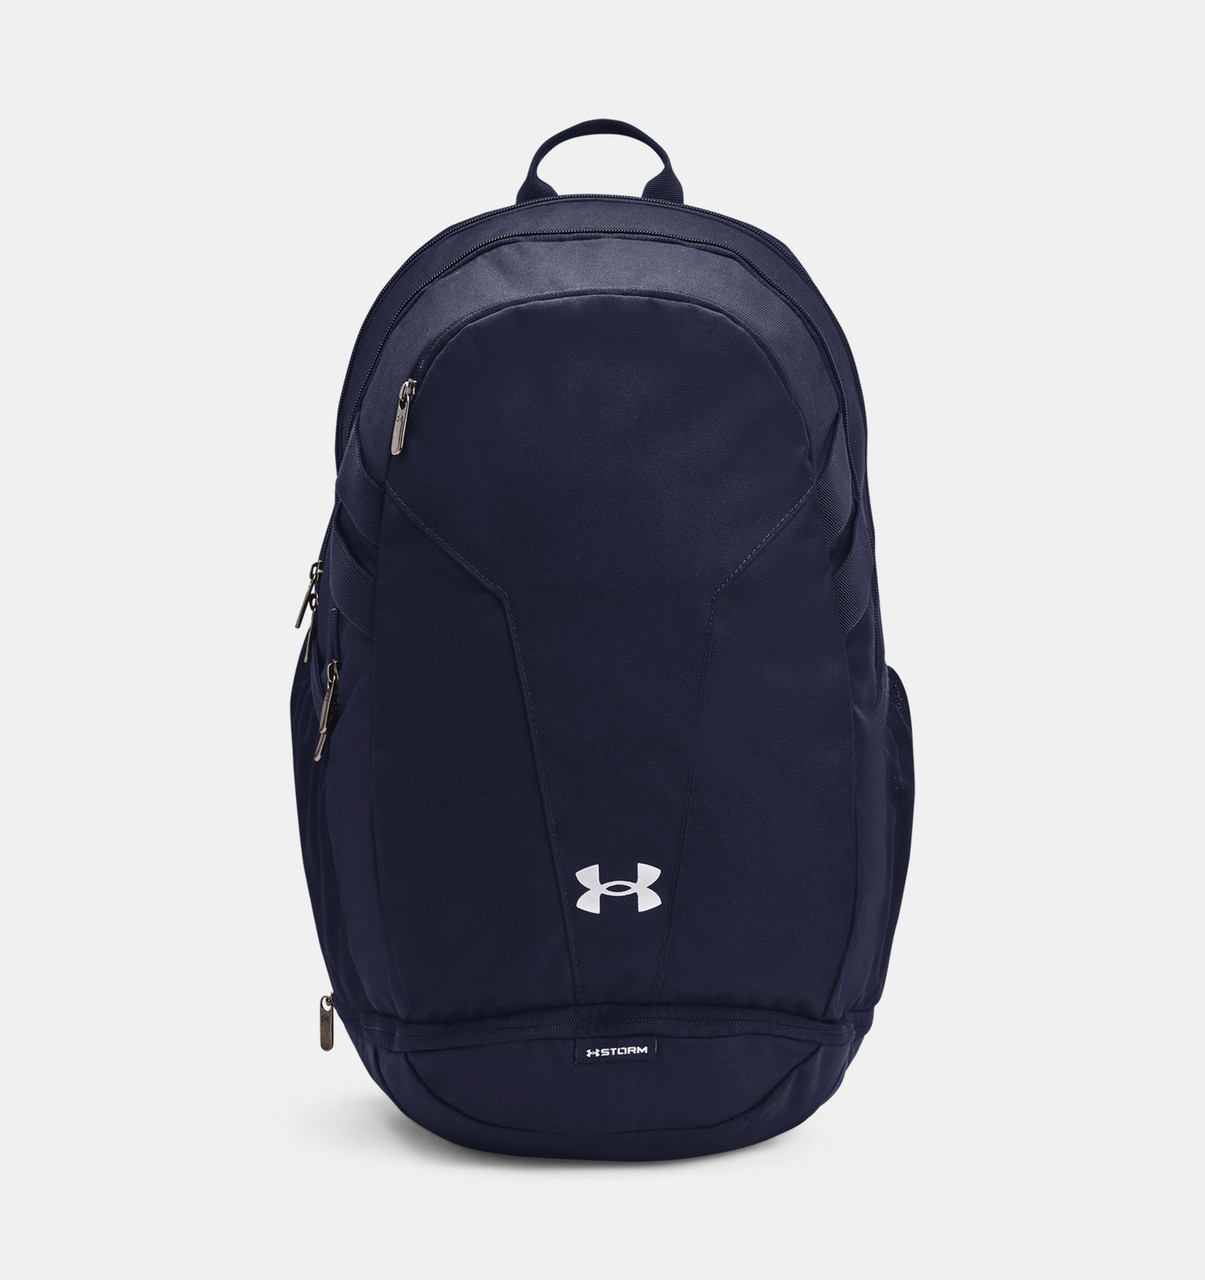 Under Armour Hustle 3.0 Backpack - Midnight Navy / Graphite - New Star